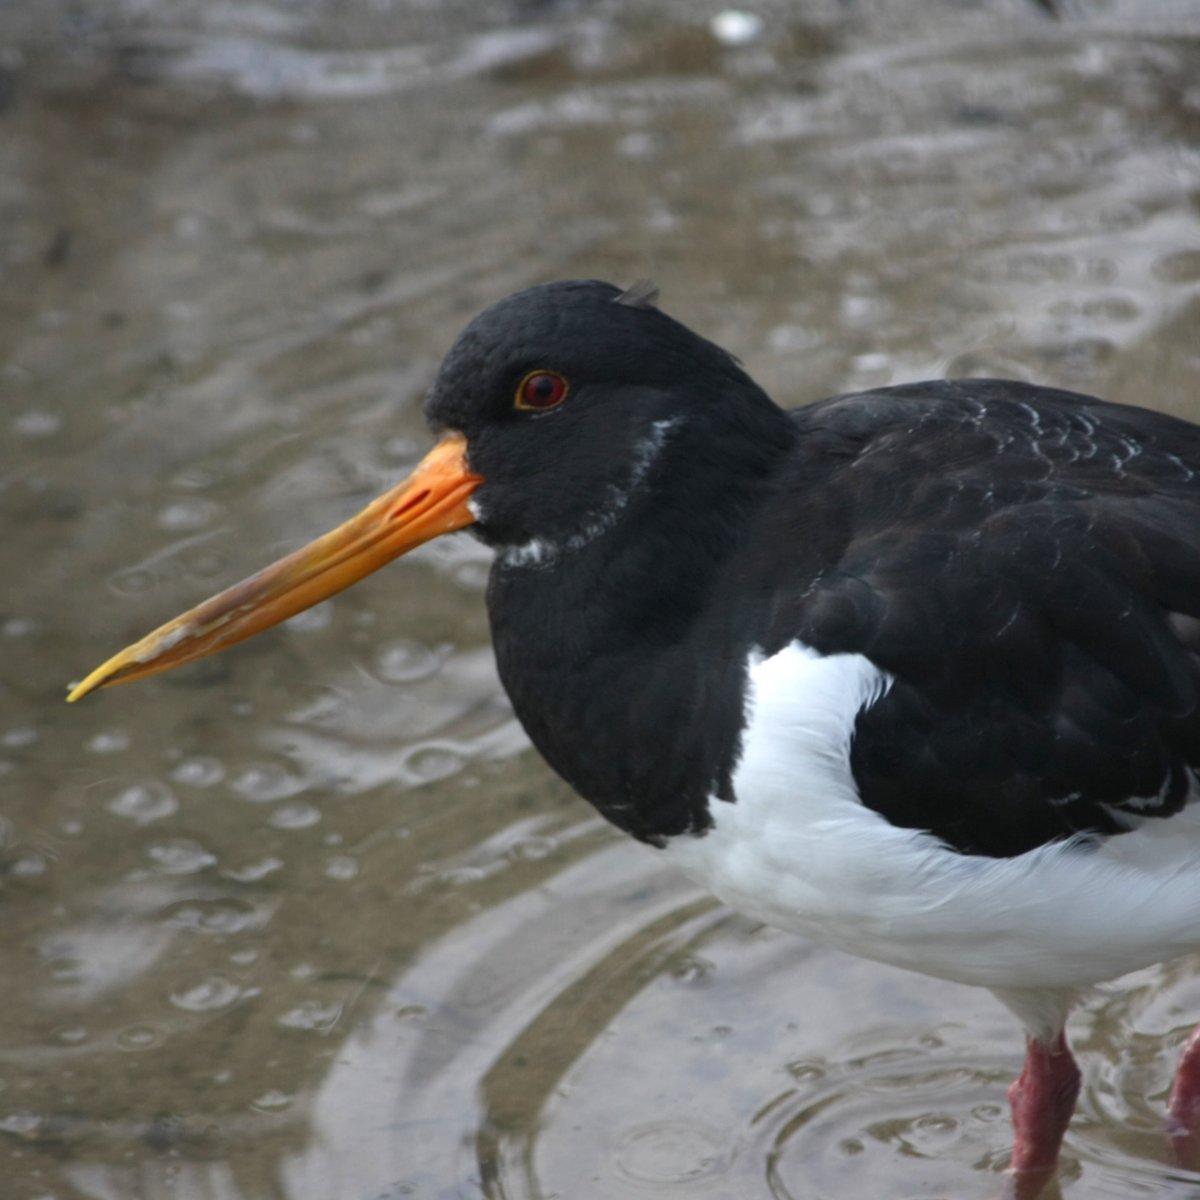 6/15 Next up on our migration compilation is a bird that many would call their seaside favourite - its the noisy oystercatcher!  While some oystercatchers stick around in the Solent for the summer, others will be migrating North to Scotland, Iceland or Norway  #migrationmonth